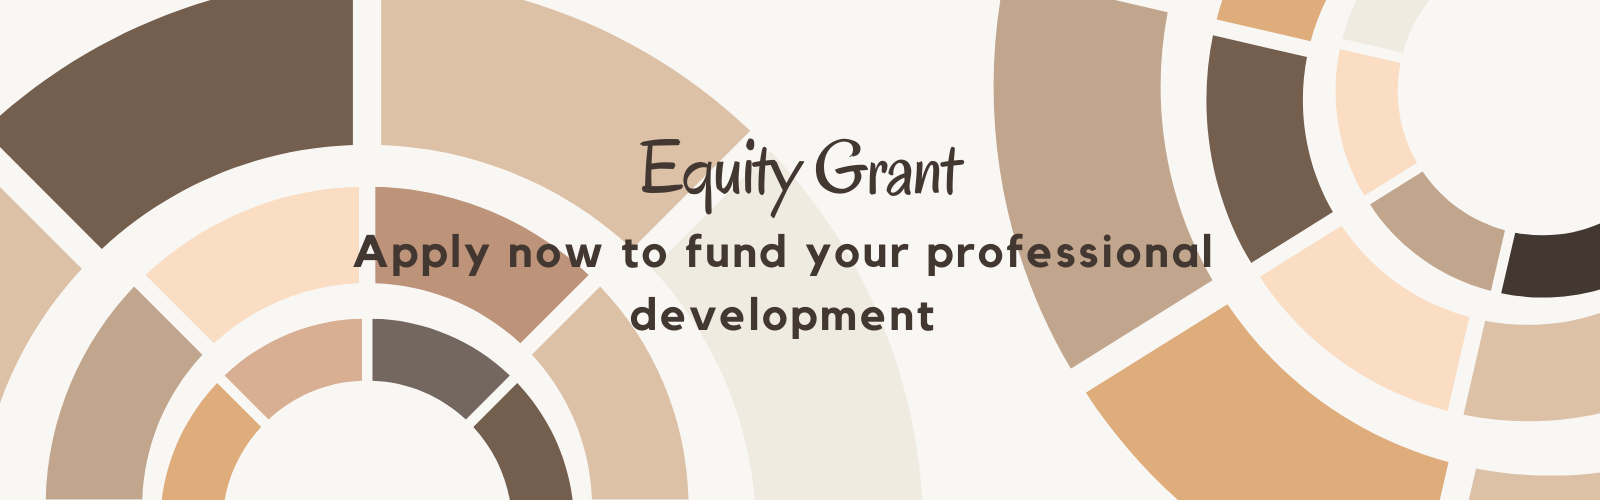 Equity grant image apply for professional development funding